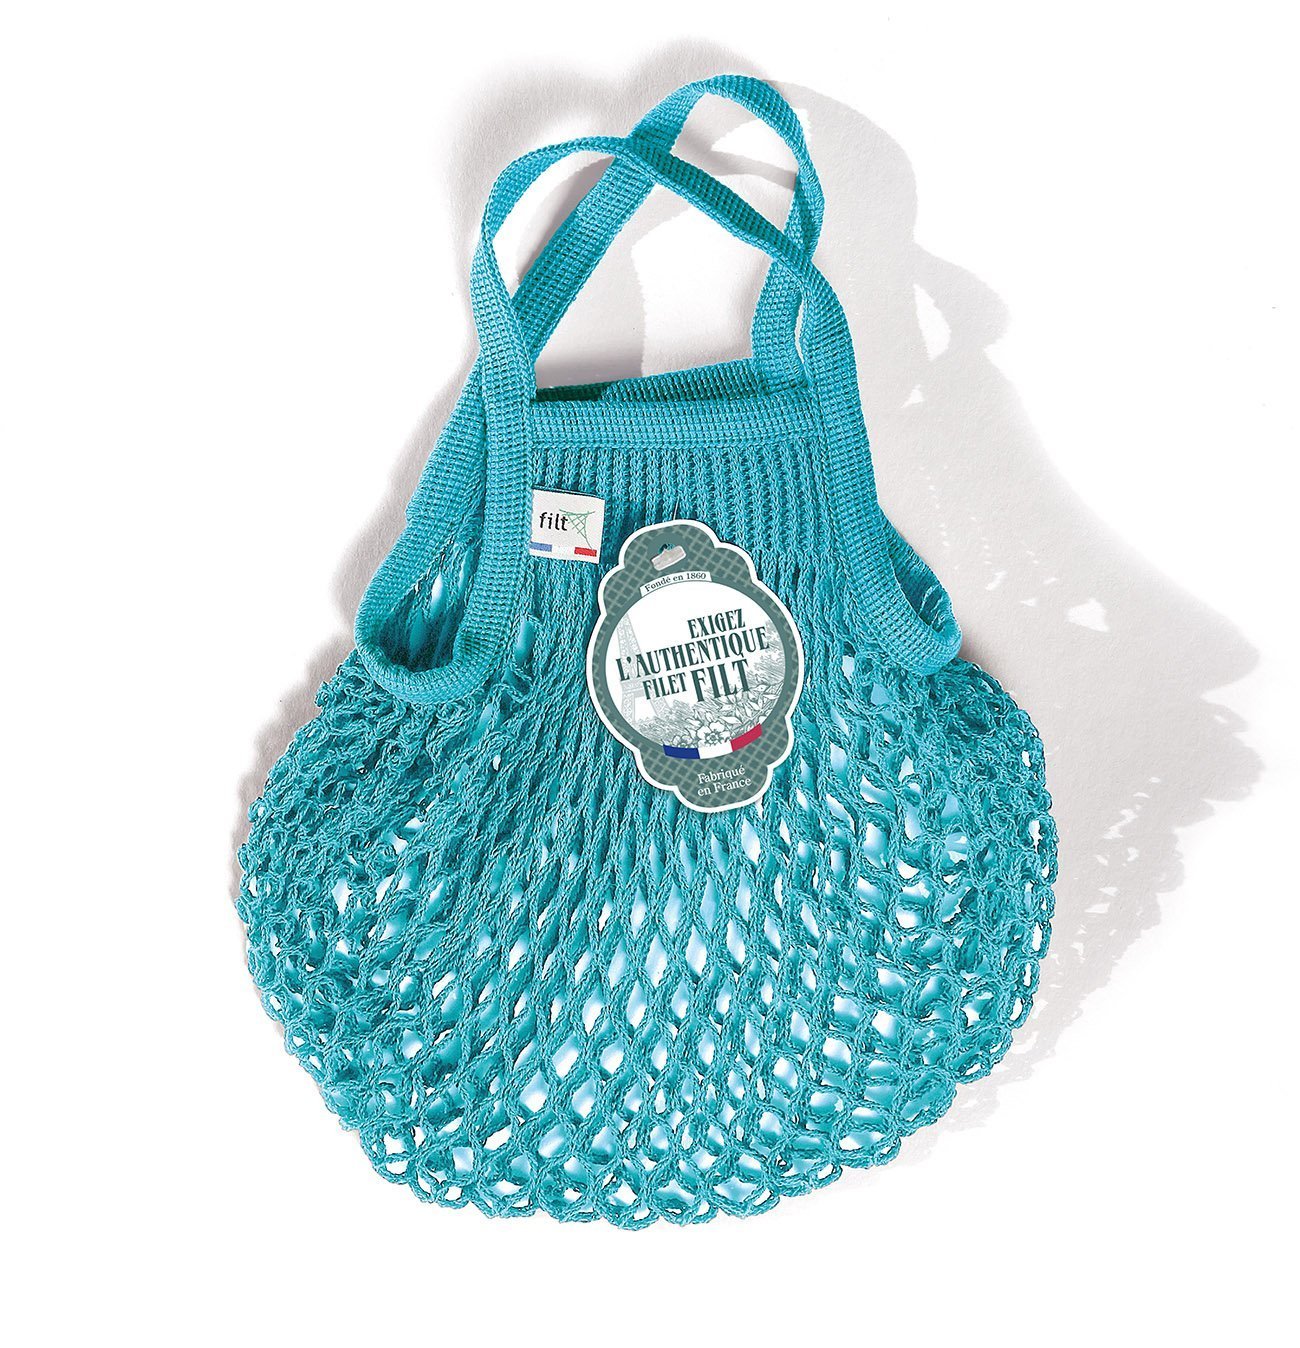 Filt Authentic French Mini Bag in Turquoise - French Dry Goods